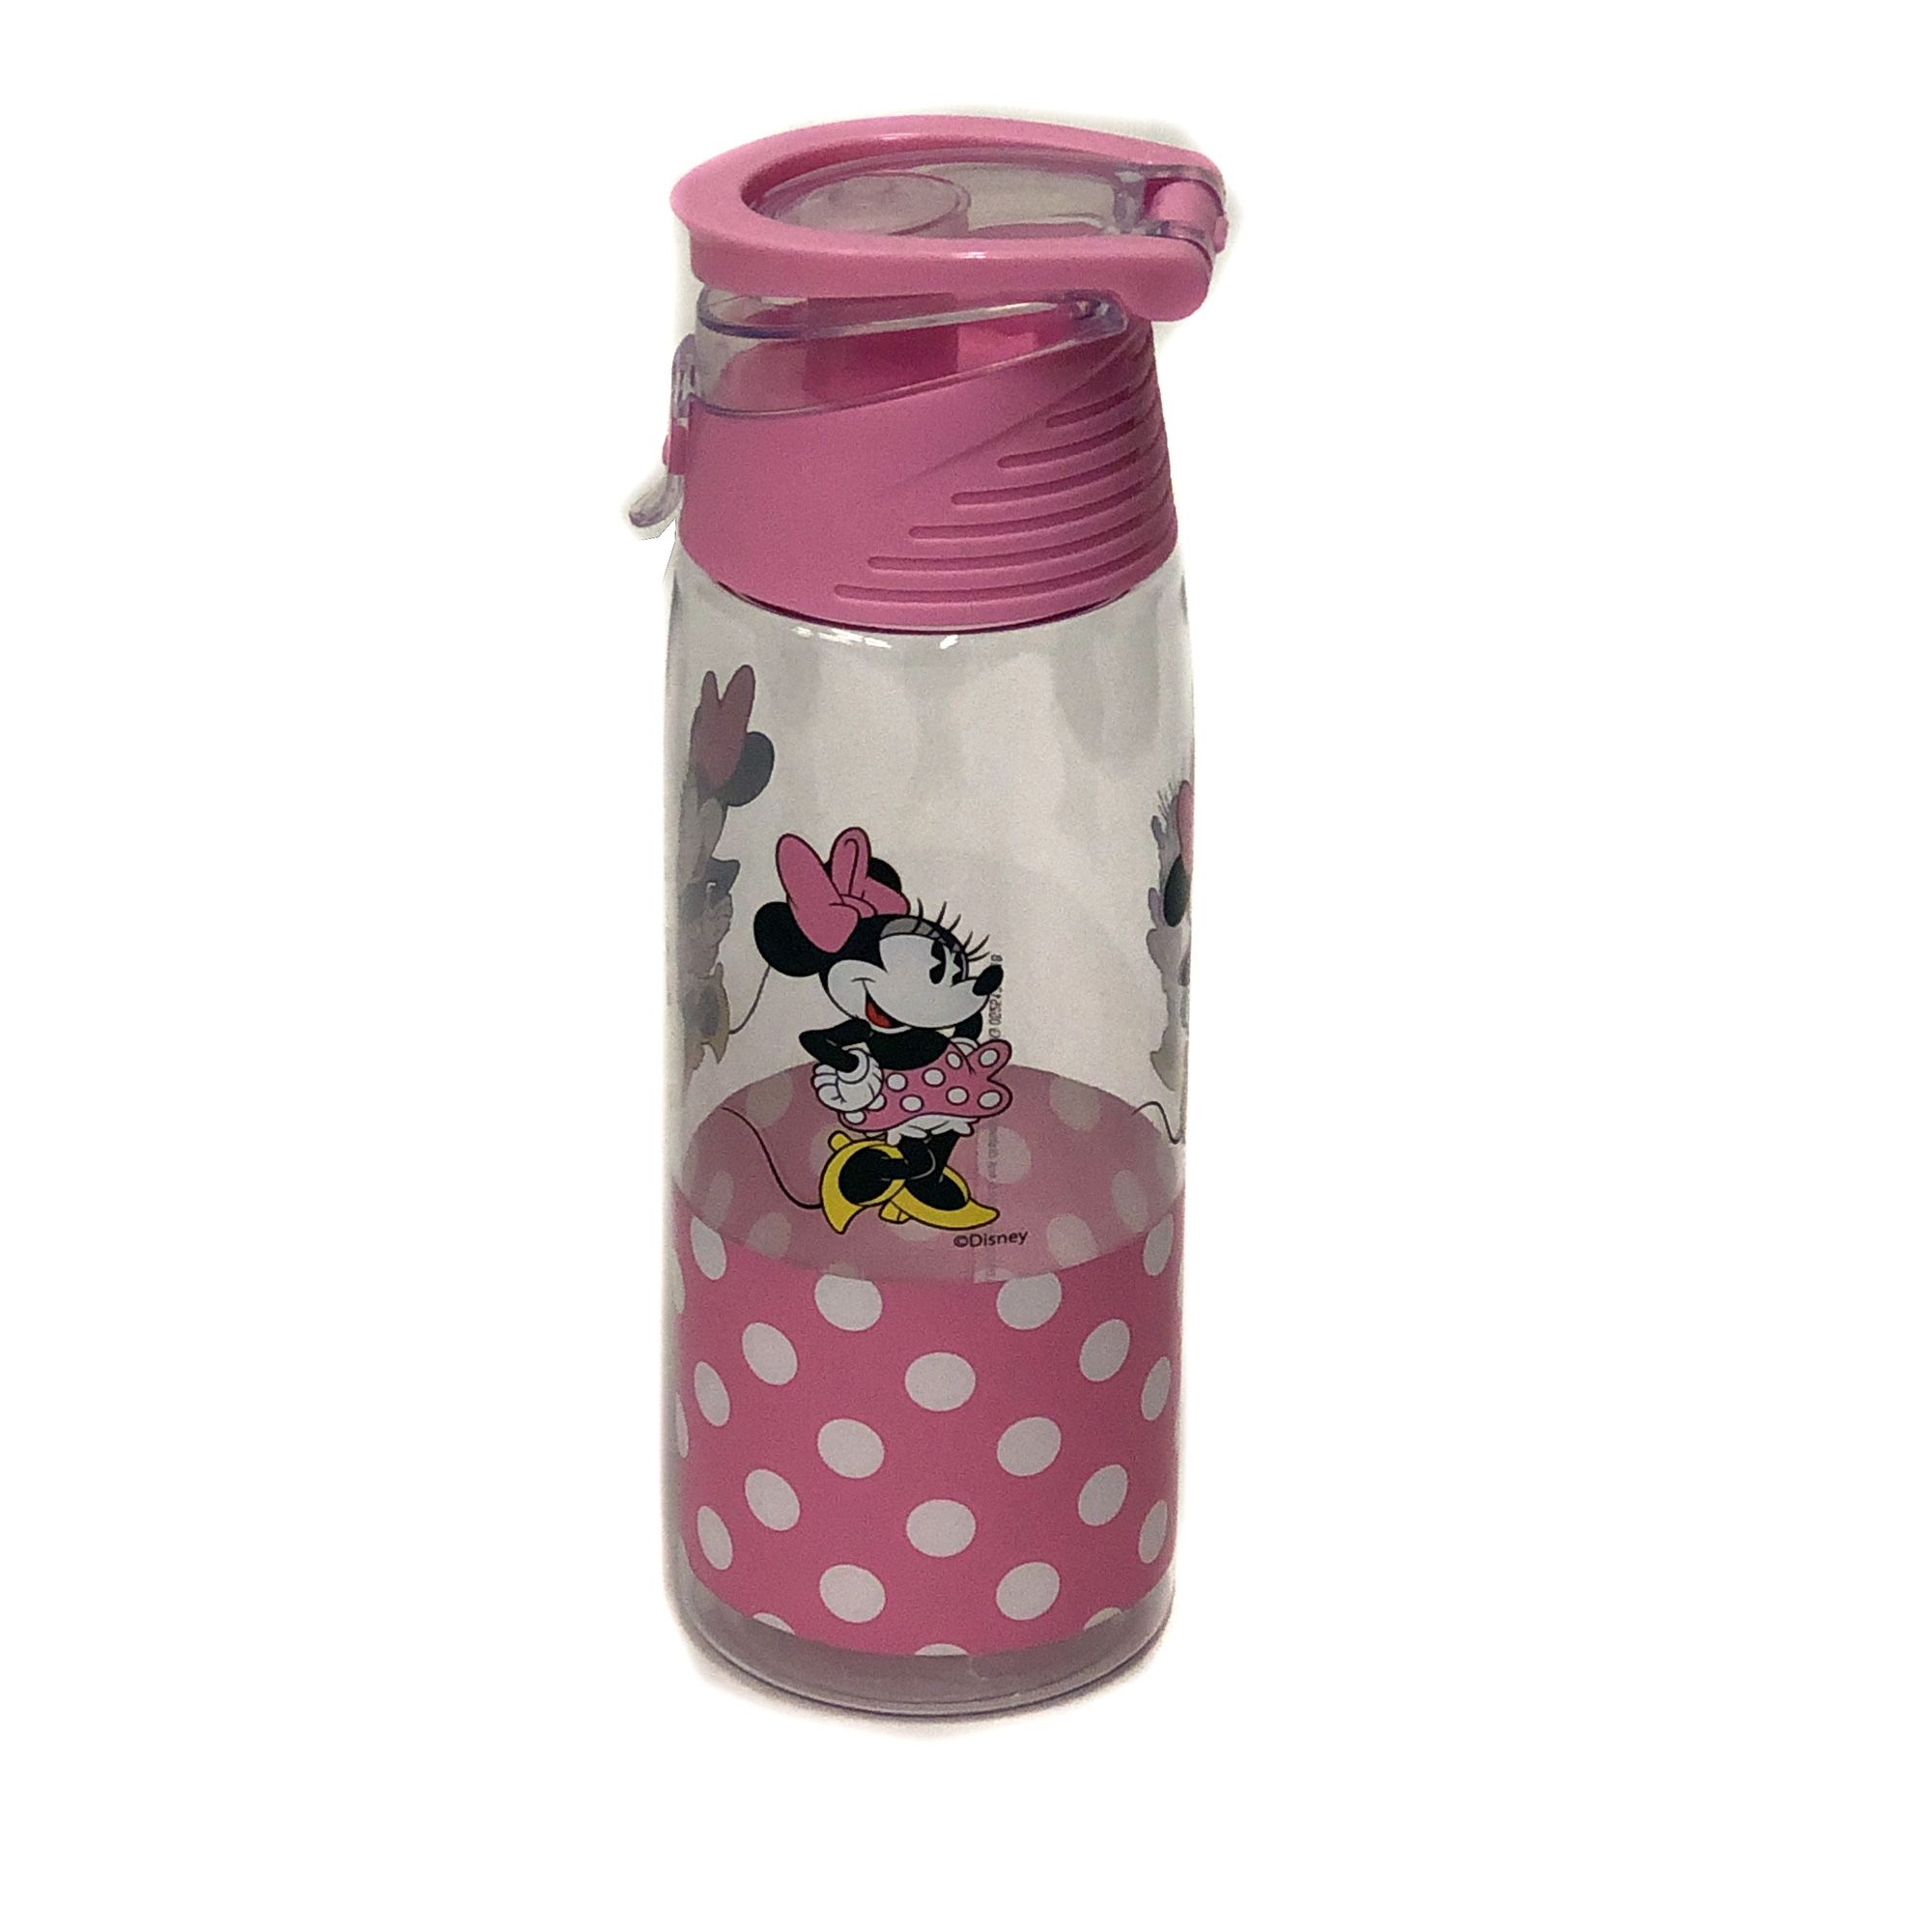 Personalized Minnie Mouse in Red Polka Dot Dress Water Bottle